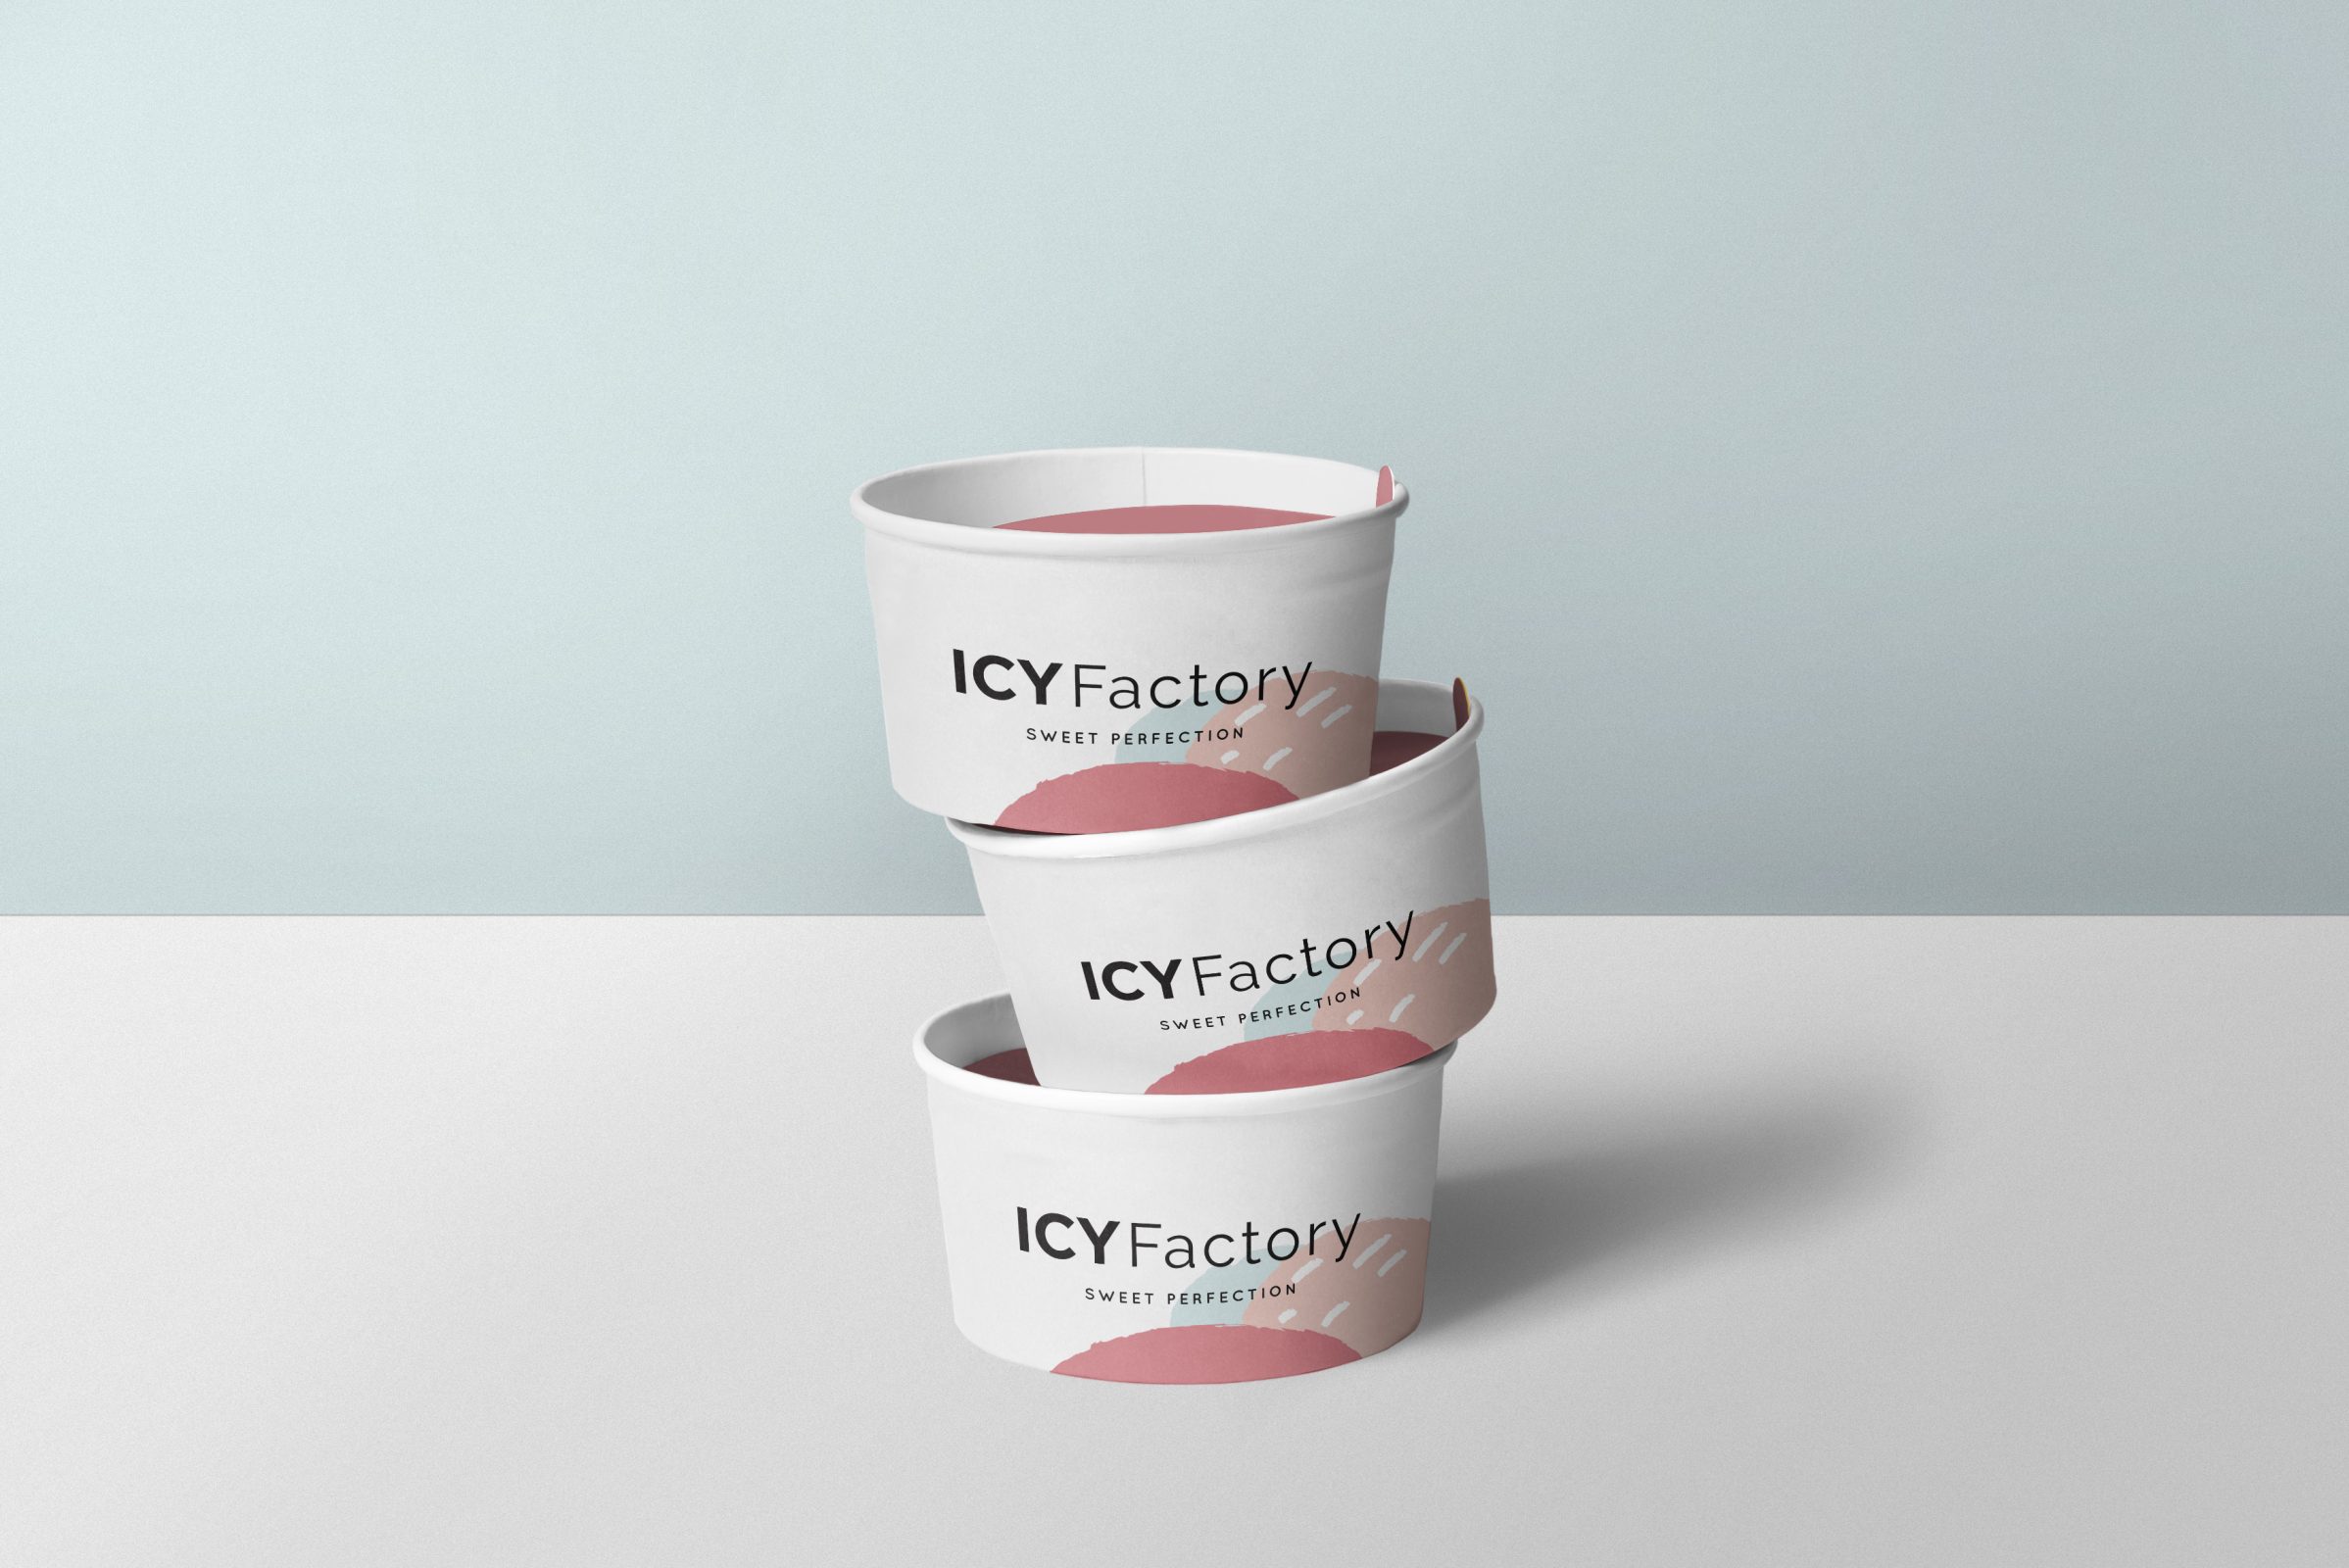 ICY Factory